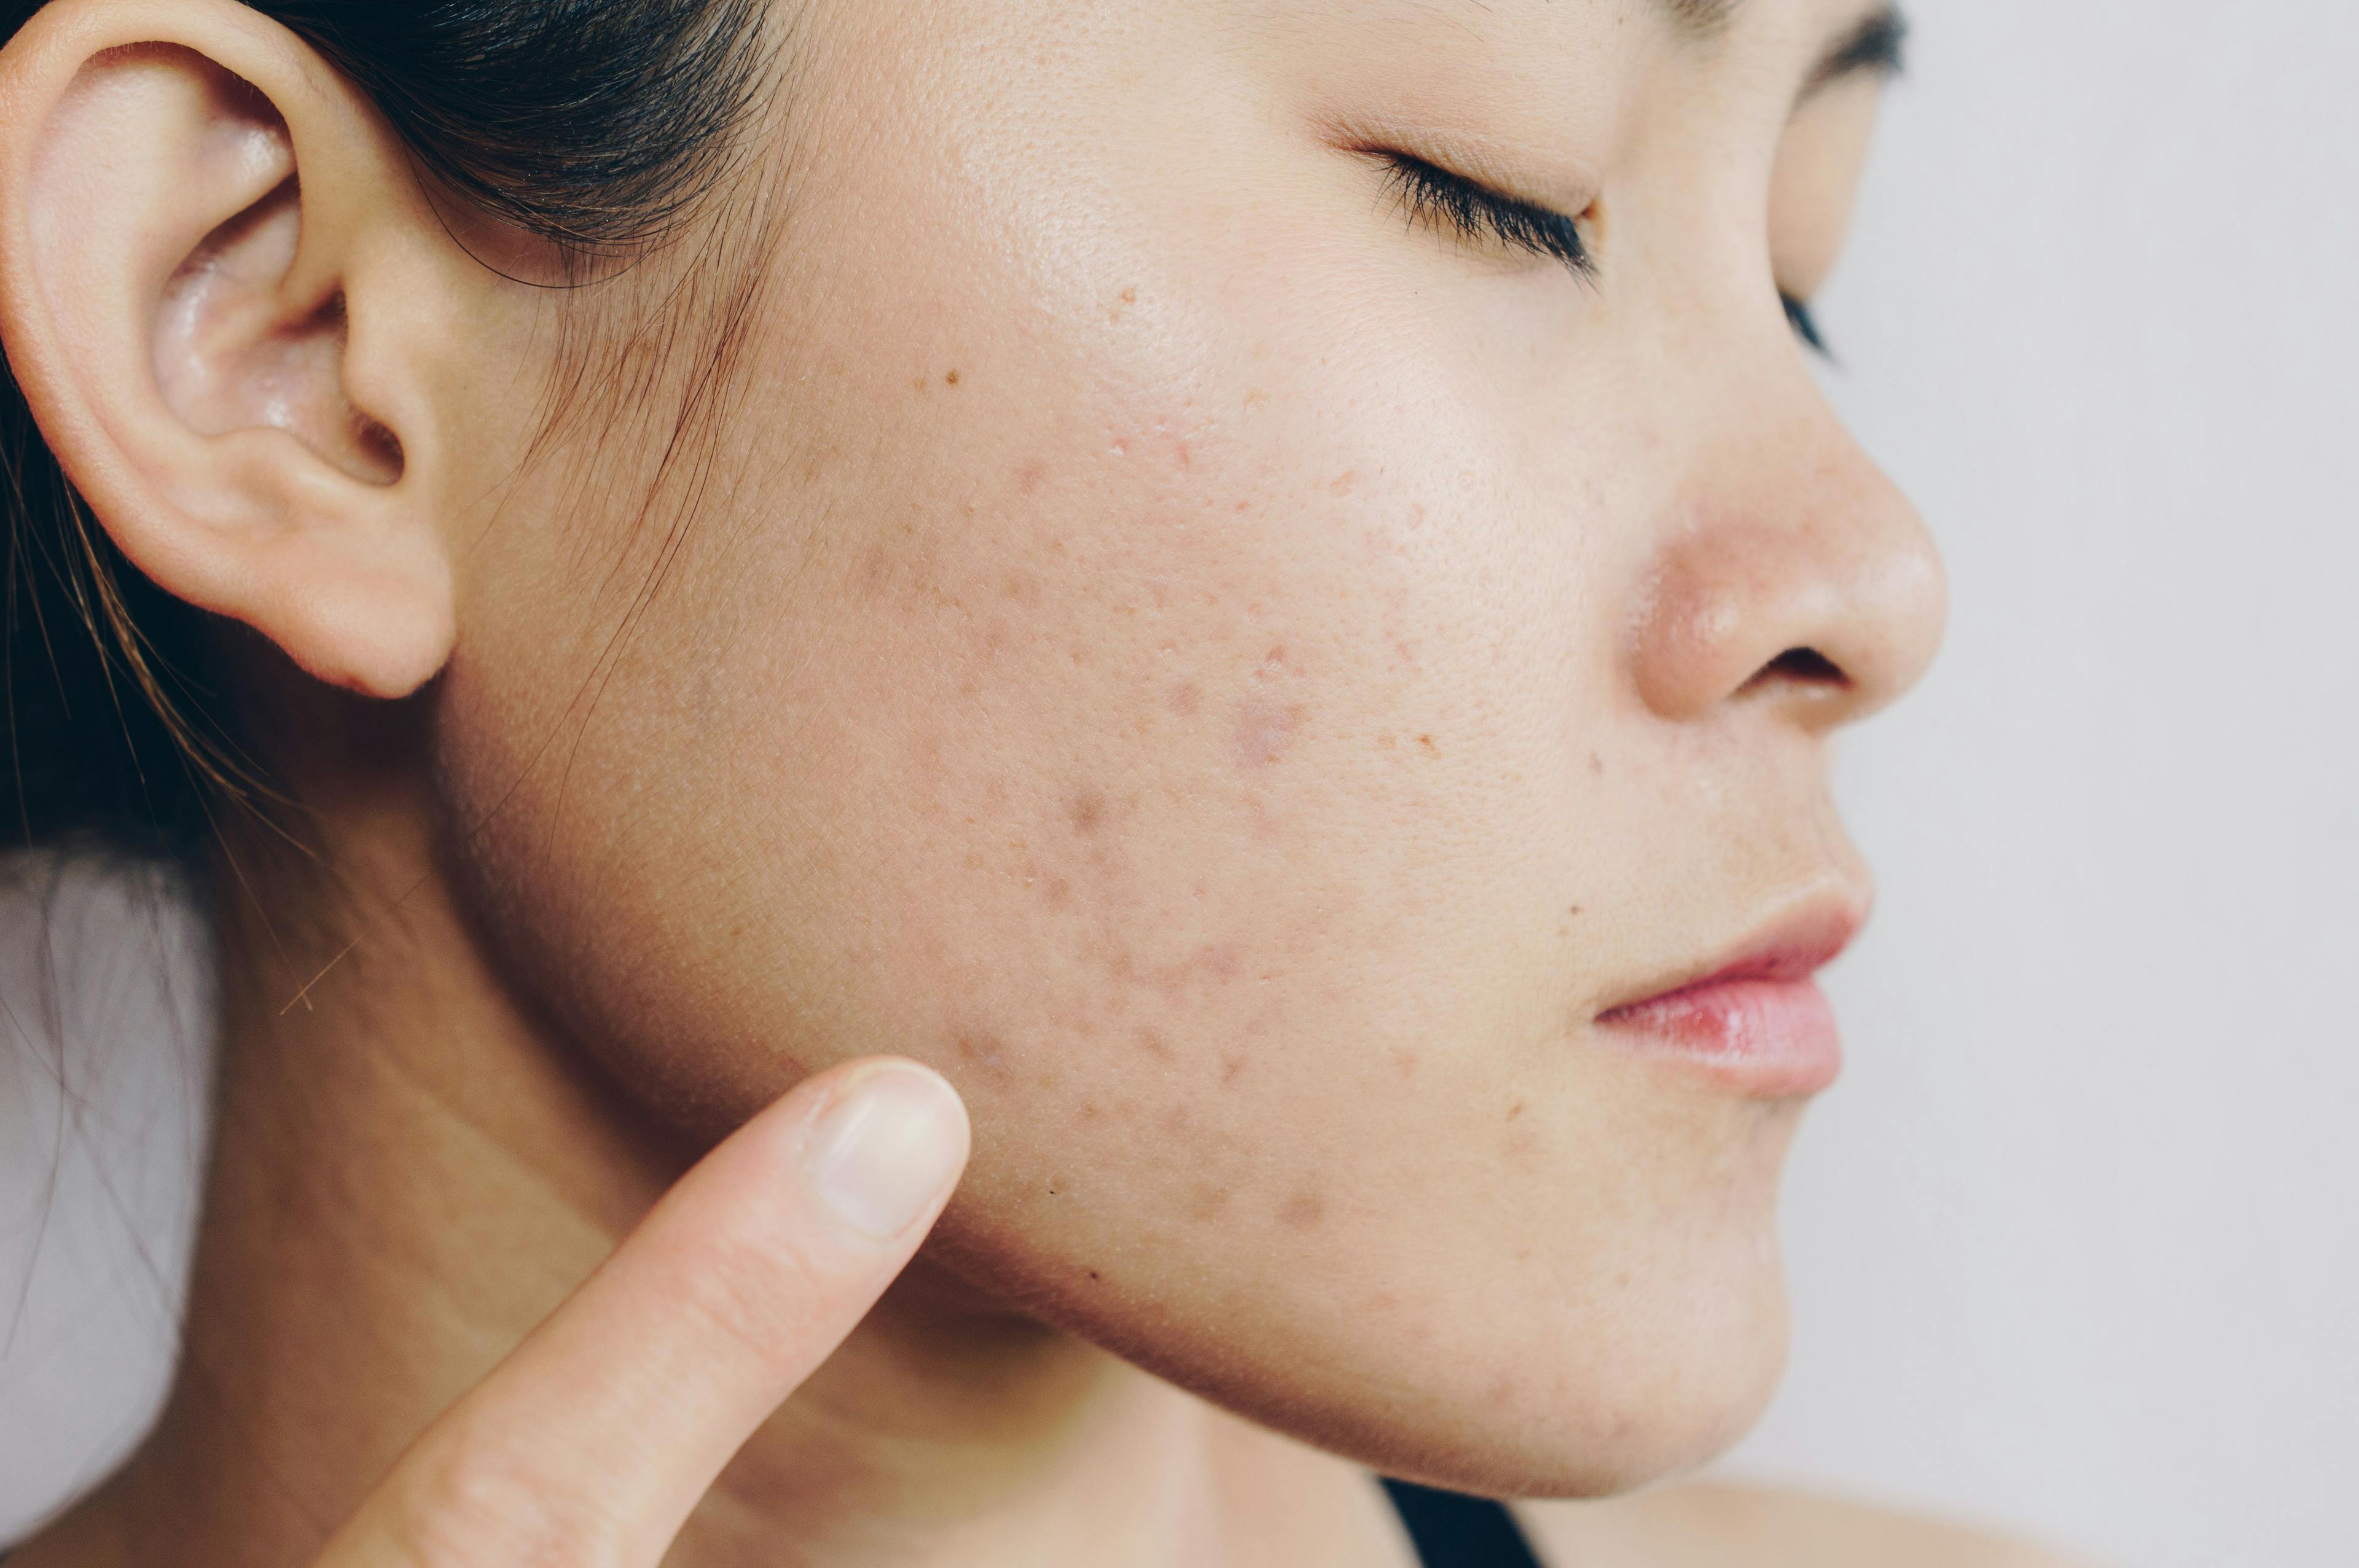 Woman pointing to acne scars on the cheek and jawline